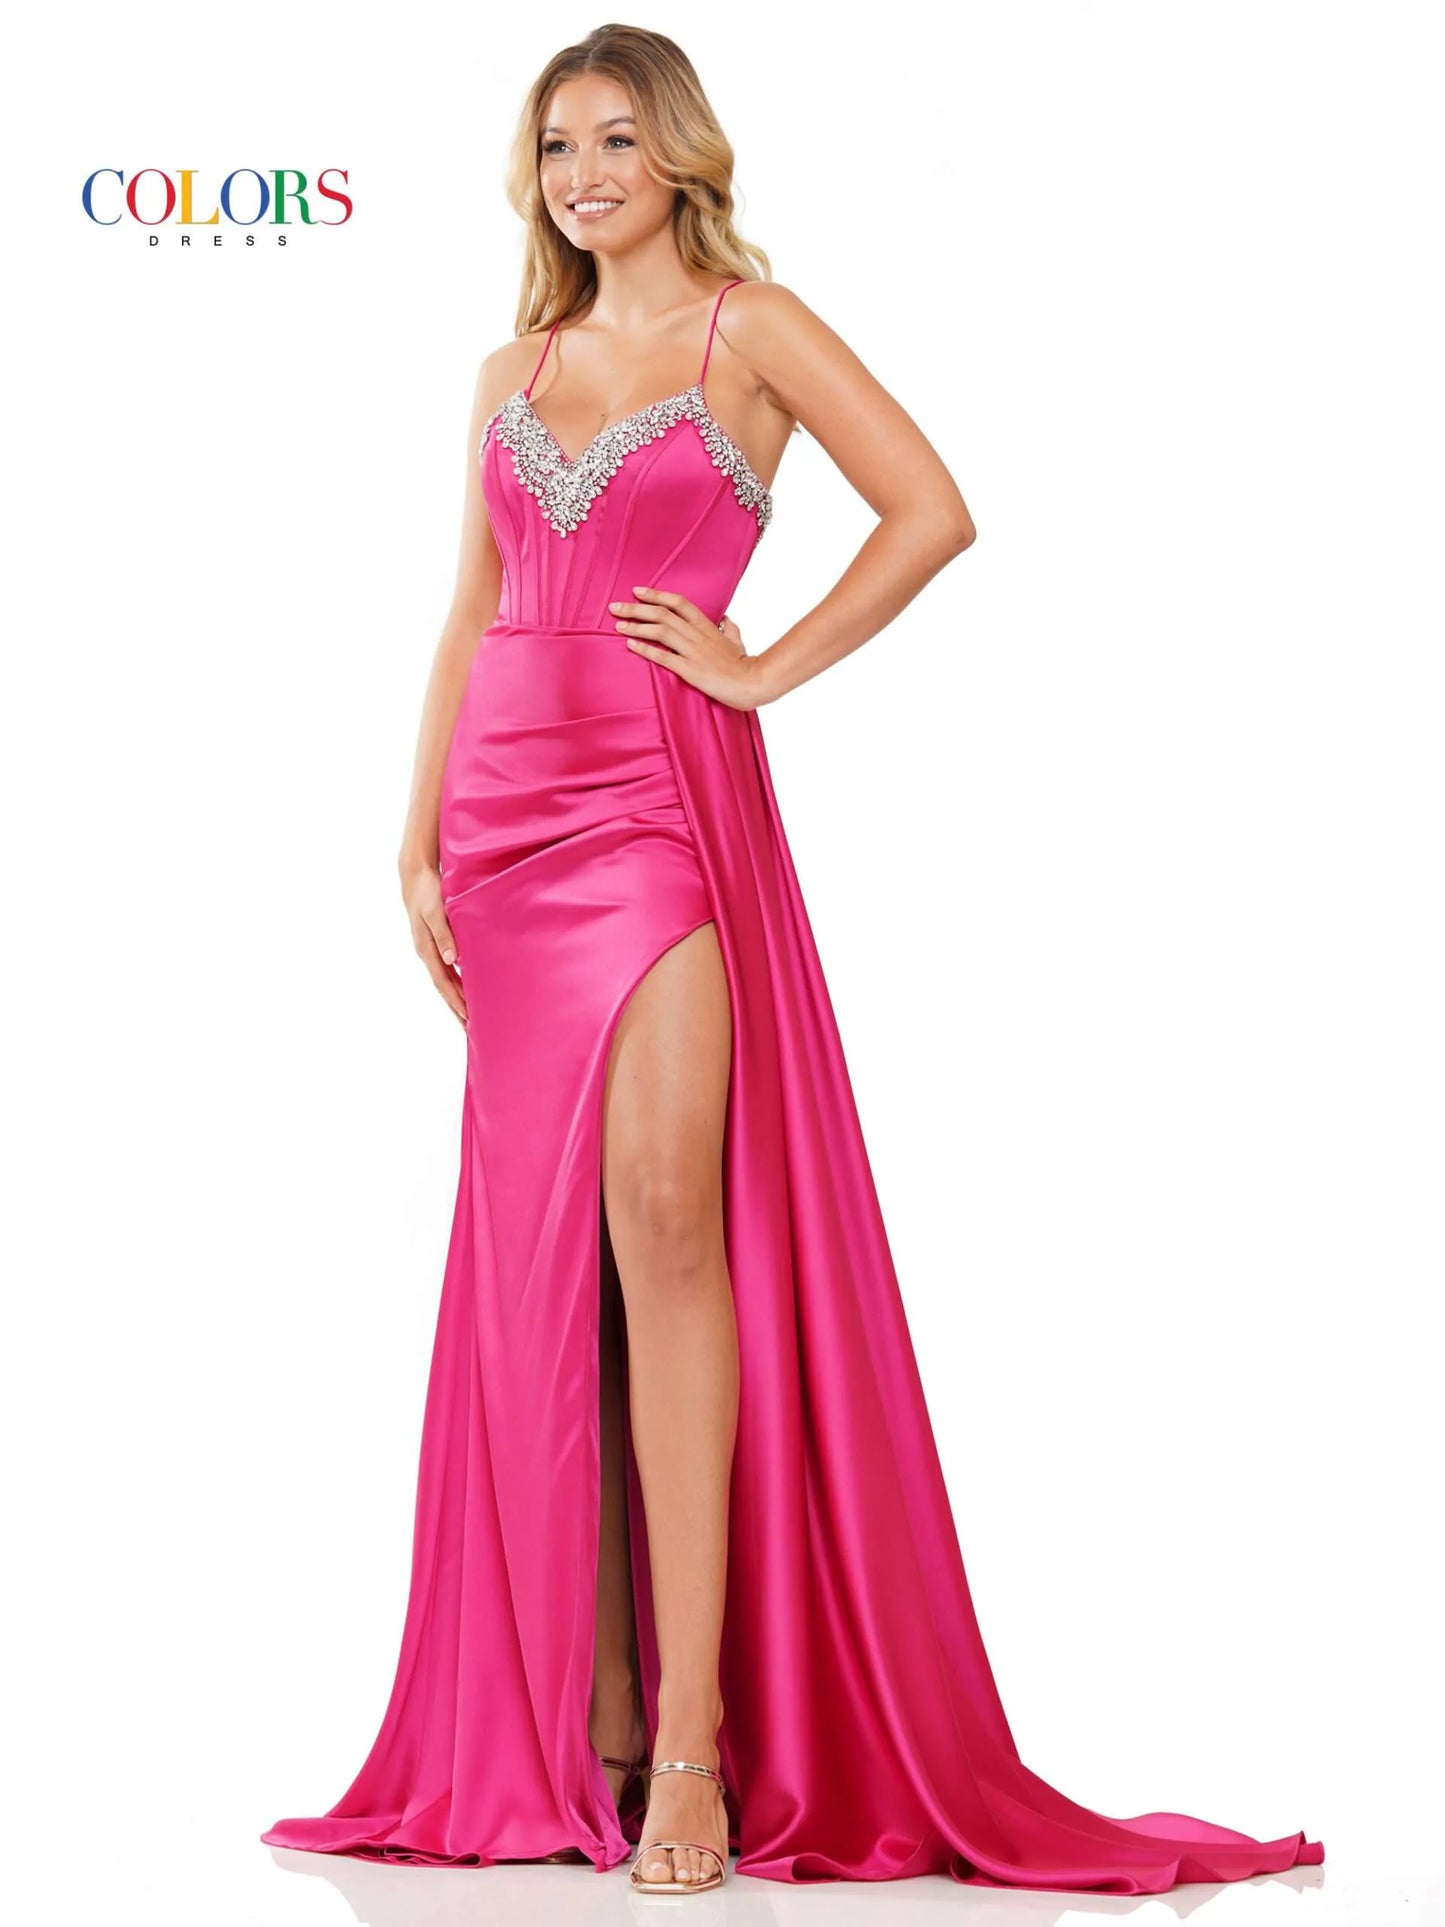 Experience elegance and glamour in this Colors Dress 3305. The stunning beaded corset V neck adds a touch of sparkle, while the satin fabric provides a luxurious feel. The high slit and side overskirt along with the ruched back create a flattering silhouette. Perfect for formal events and pageants, this dress exudes confidence and sophistication. Prom  Sizes: 0-22  Colors: Black, Red, Royal, Hot Pink